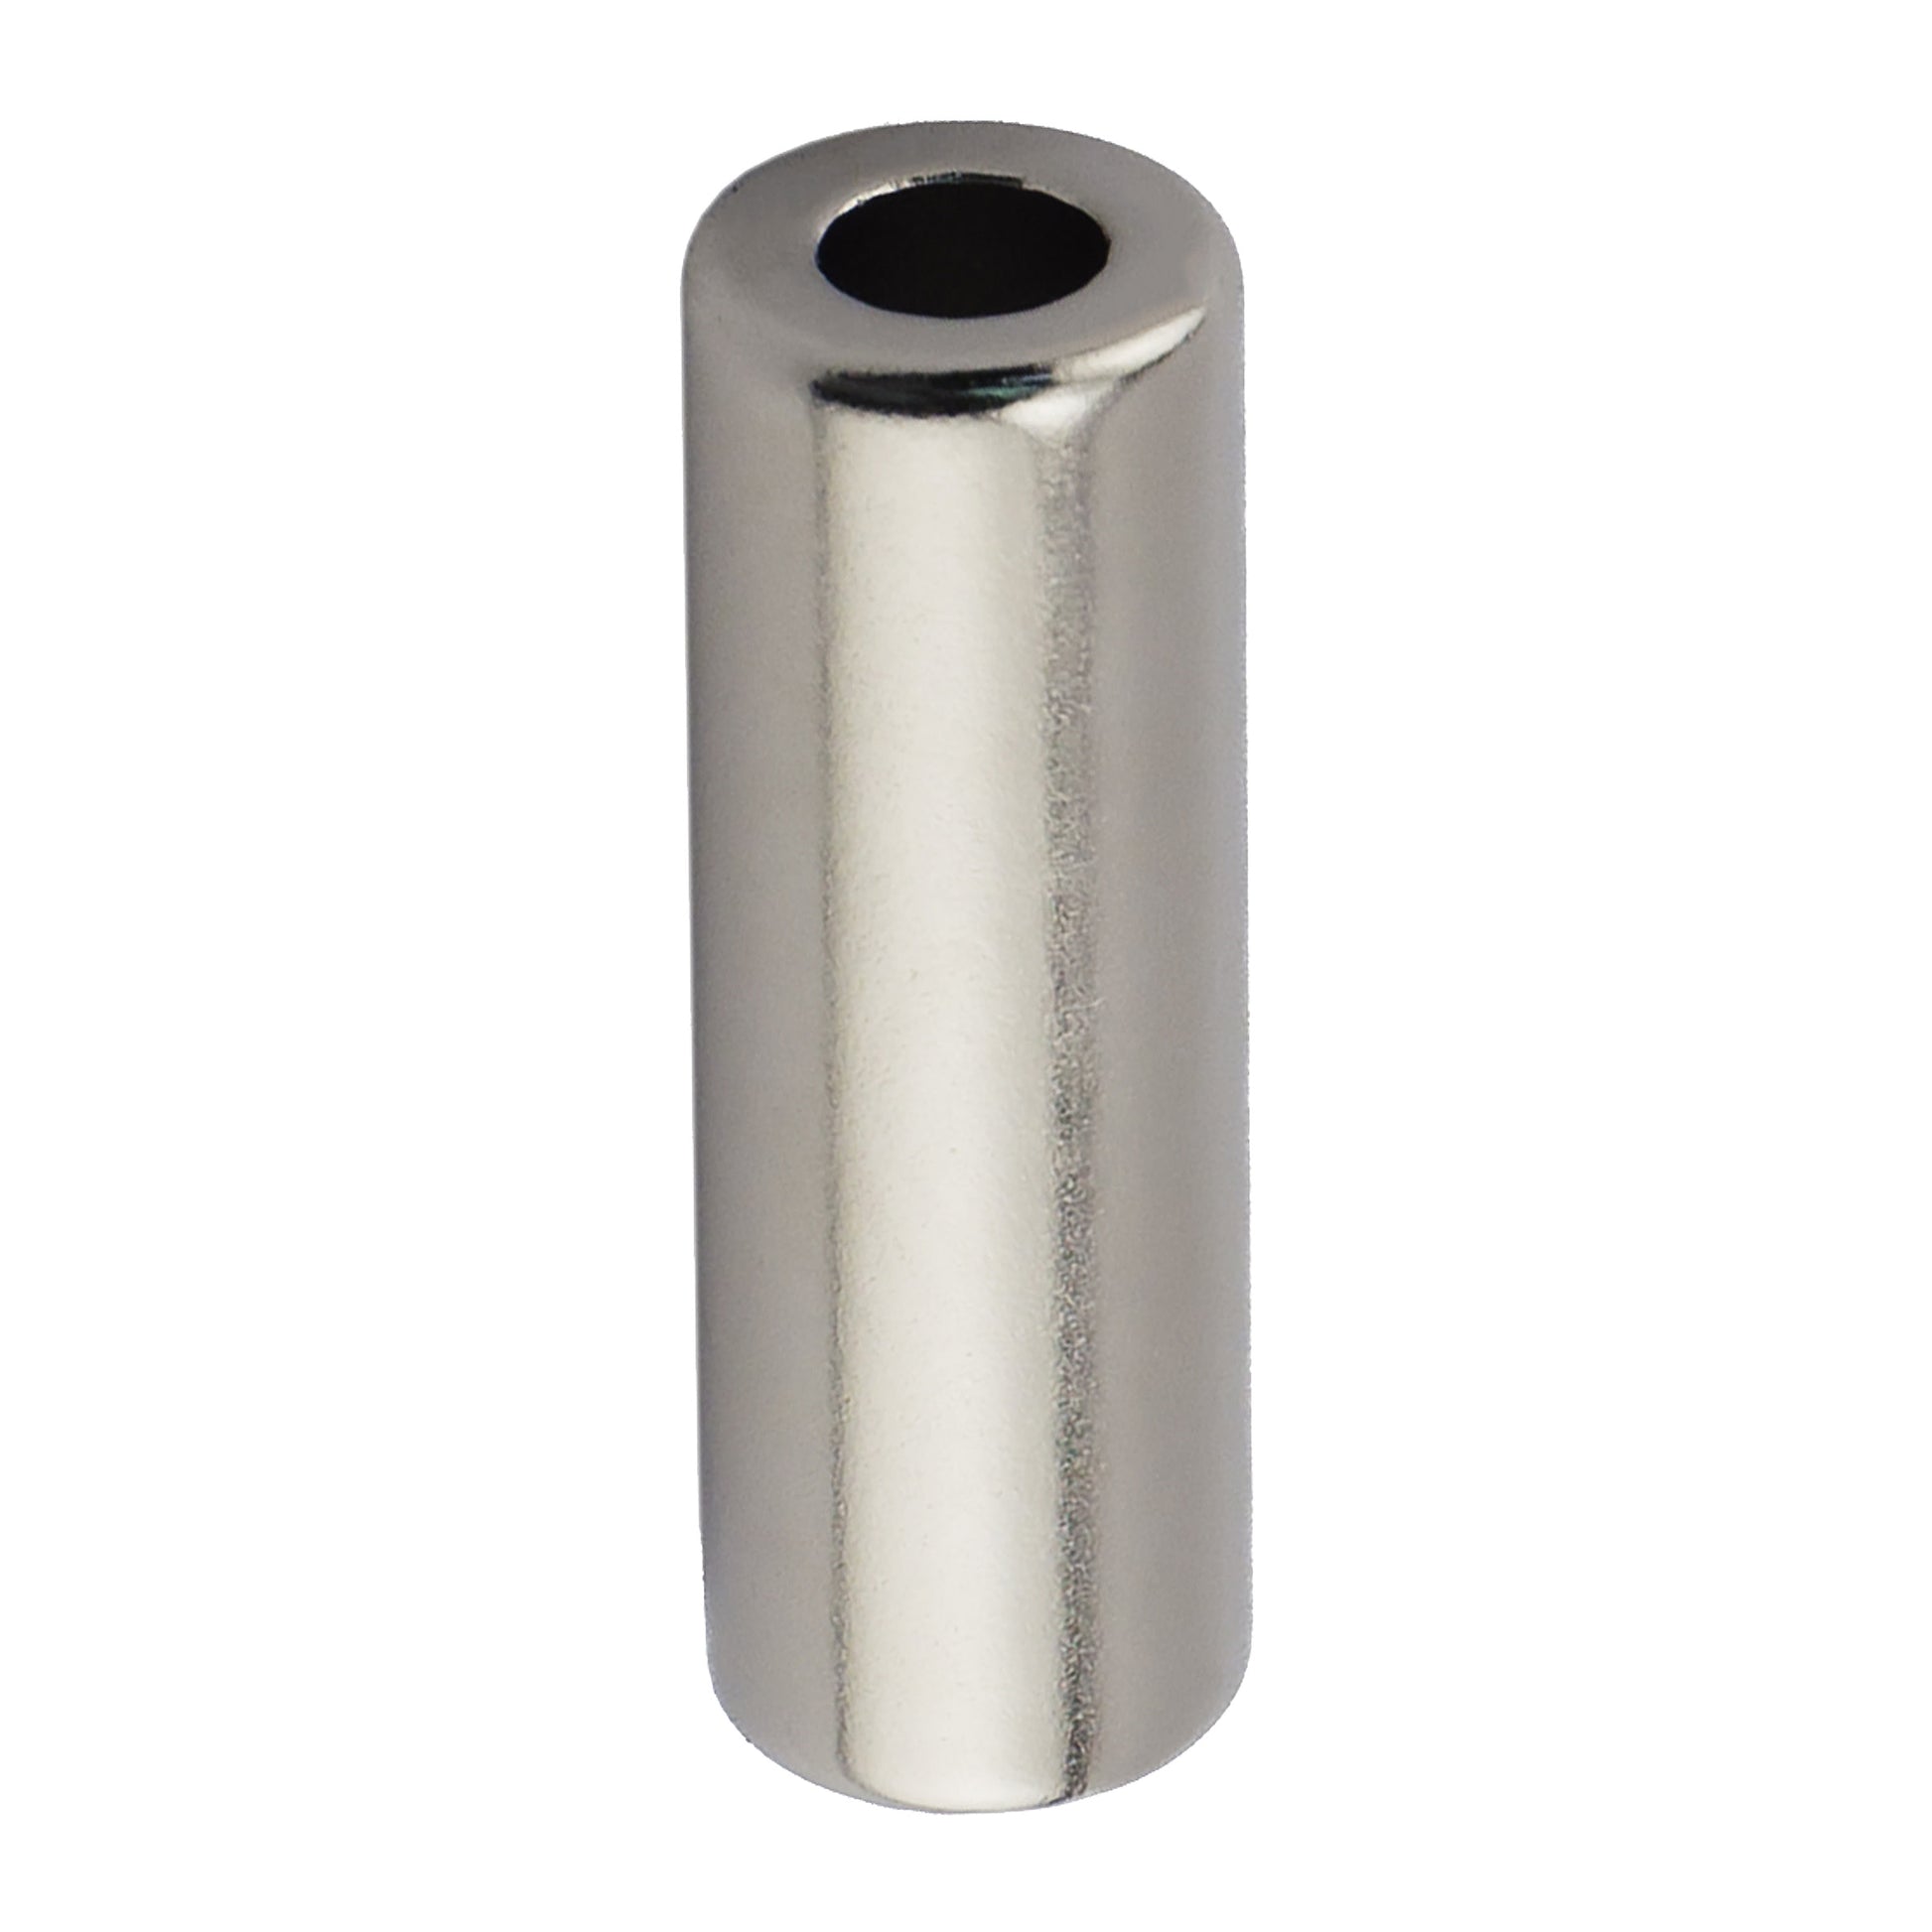 Load image into Gallery viewer, NR005025N Neodymium Ring Magnet - Front View